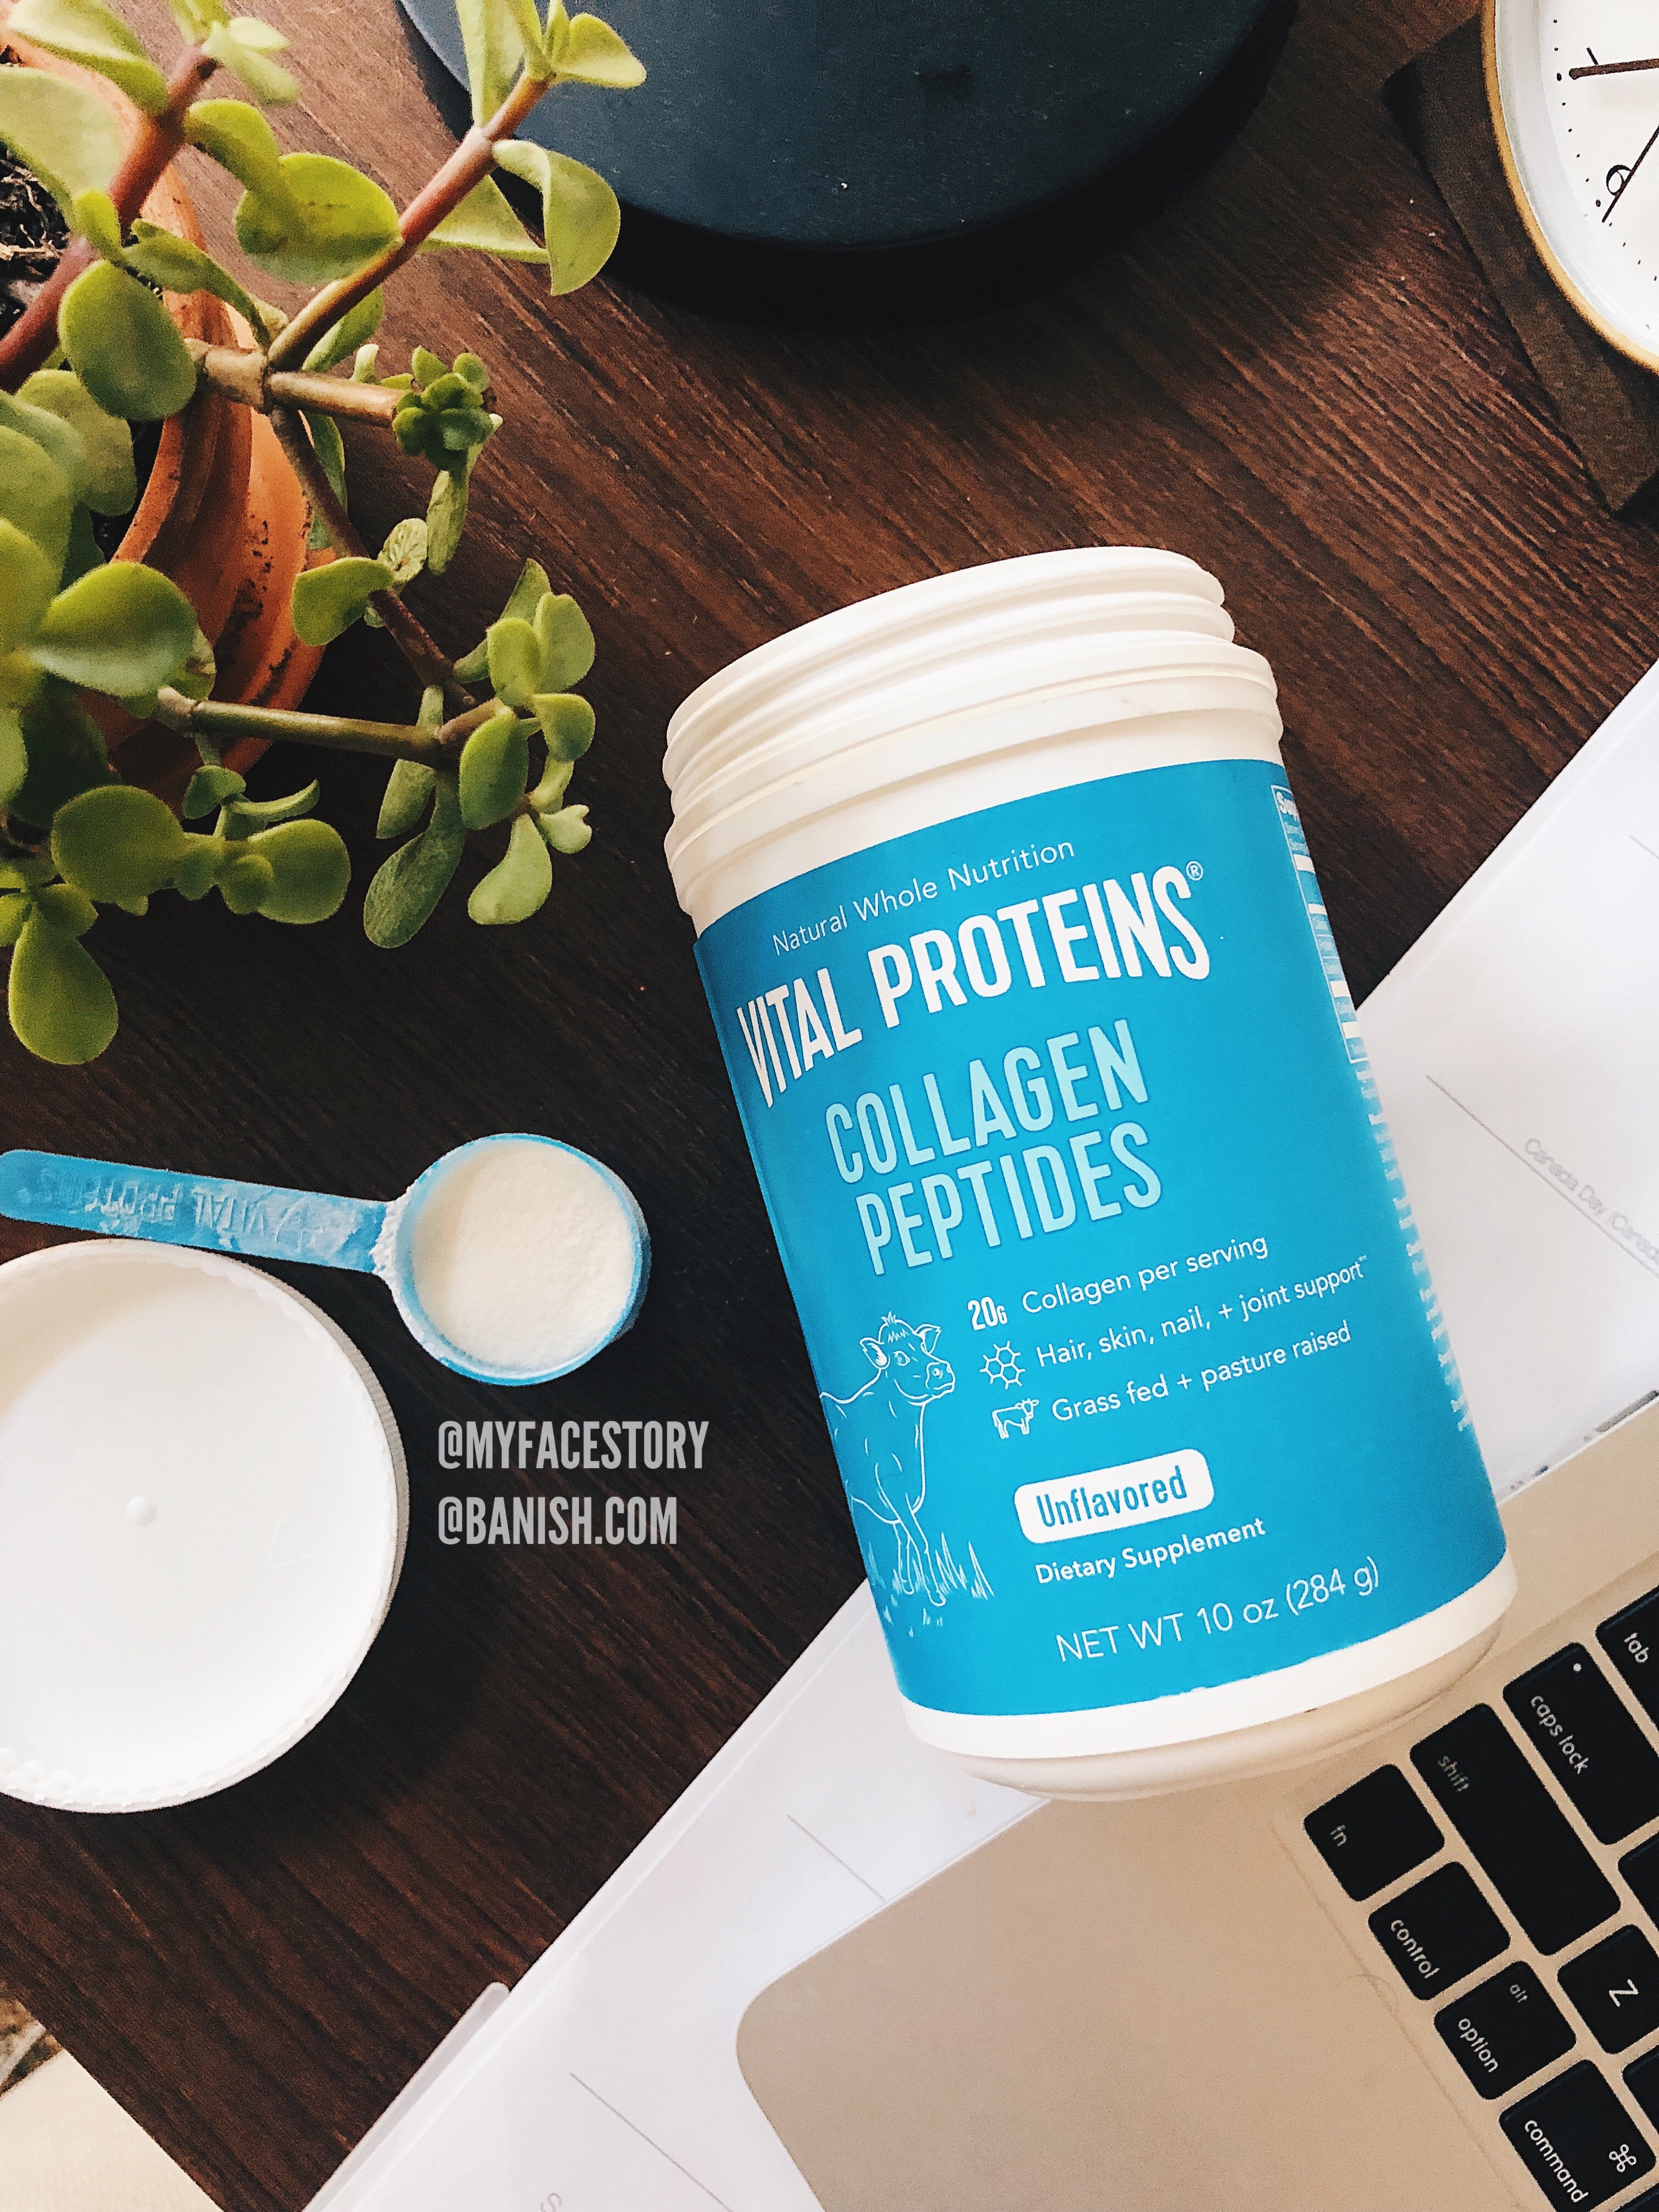 Vital Proteins Collagen Peptides: My Experience